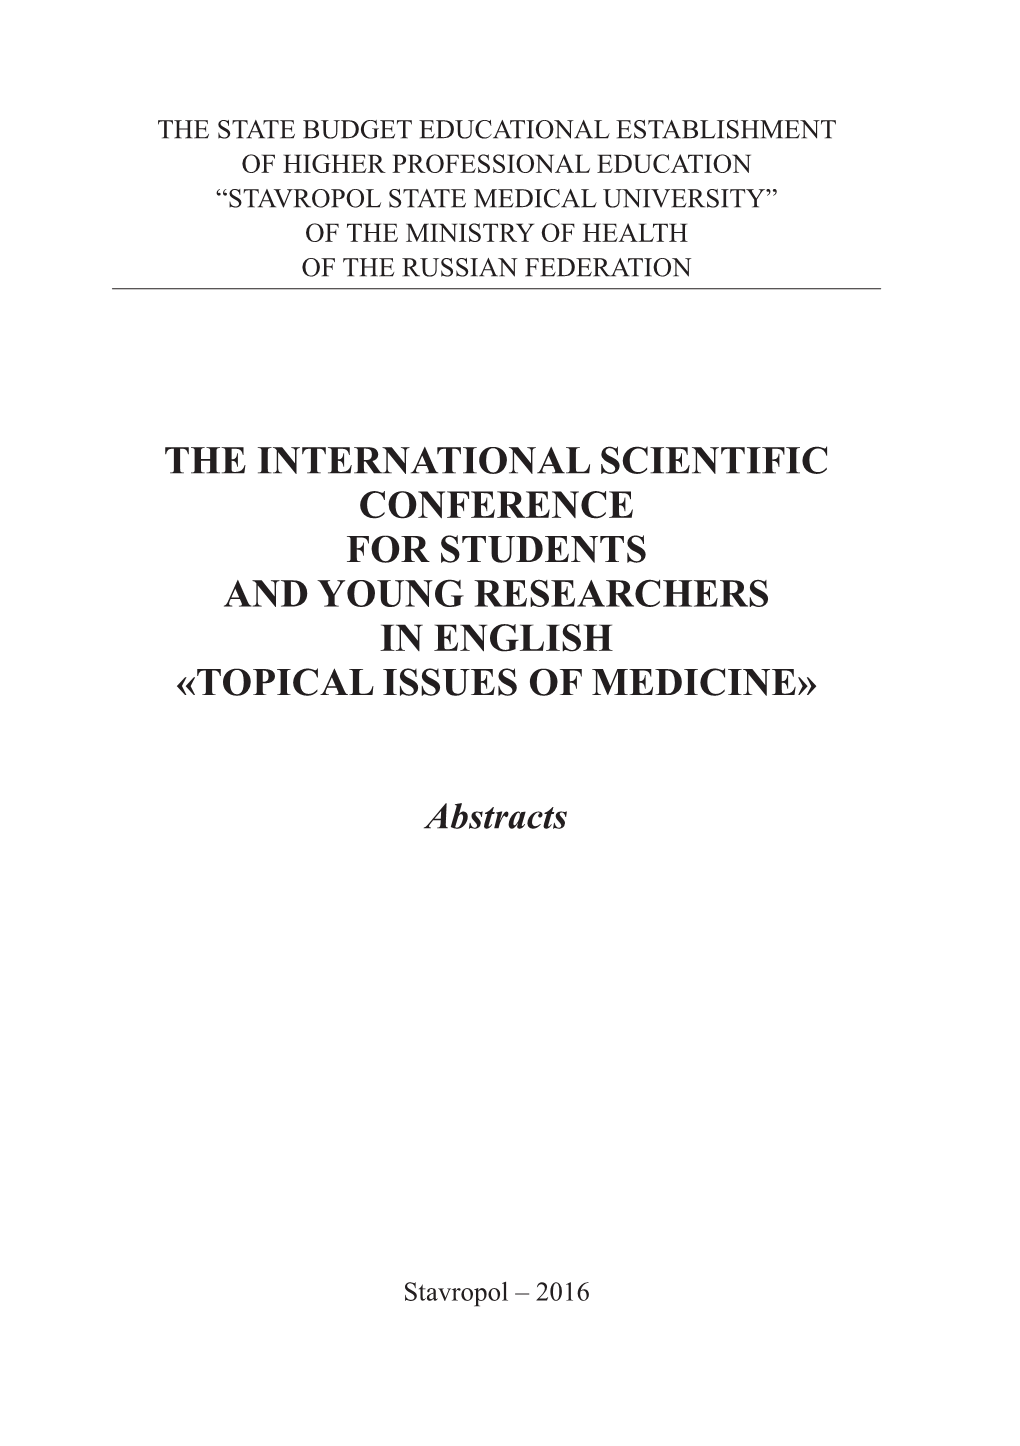 The International Scientific Conference for Students and Young Researchers in English «Topical Issues of Medicine»